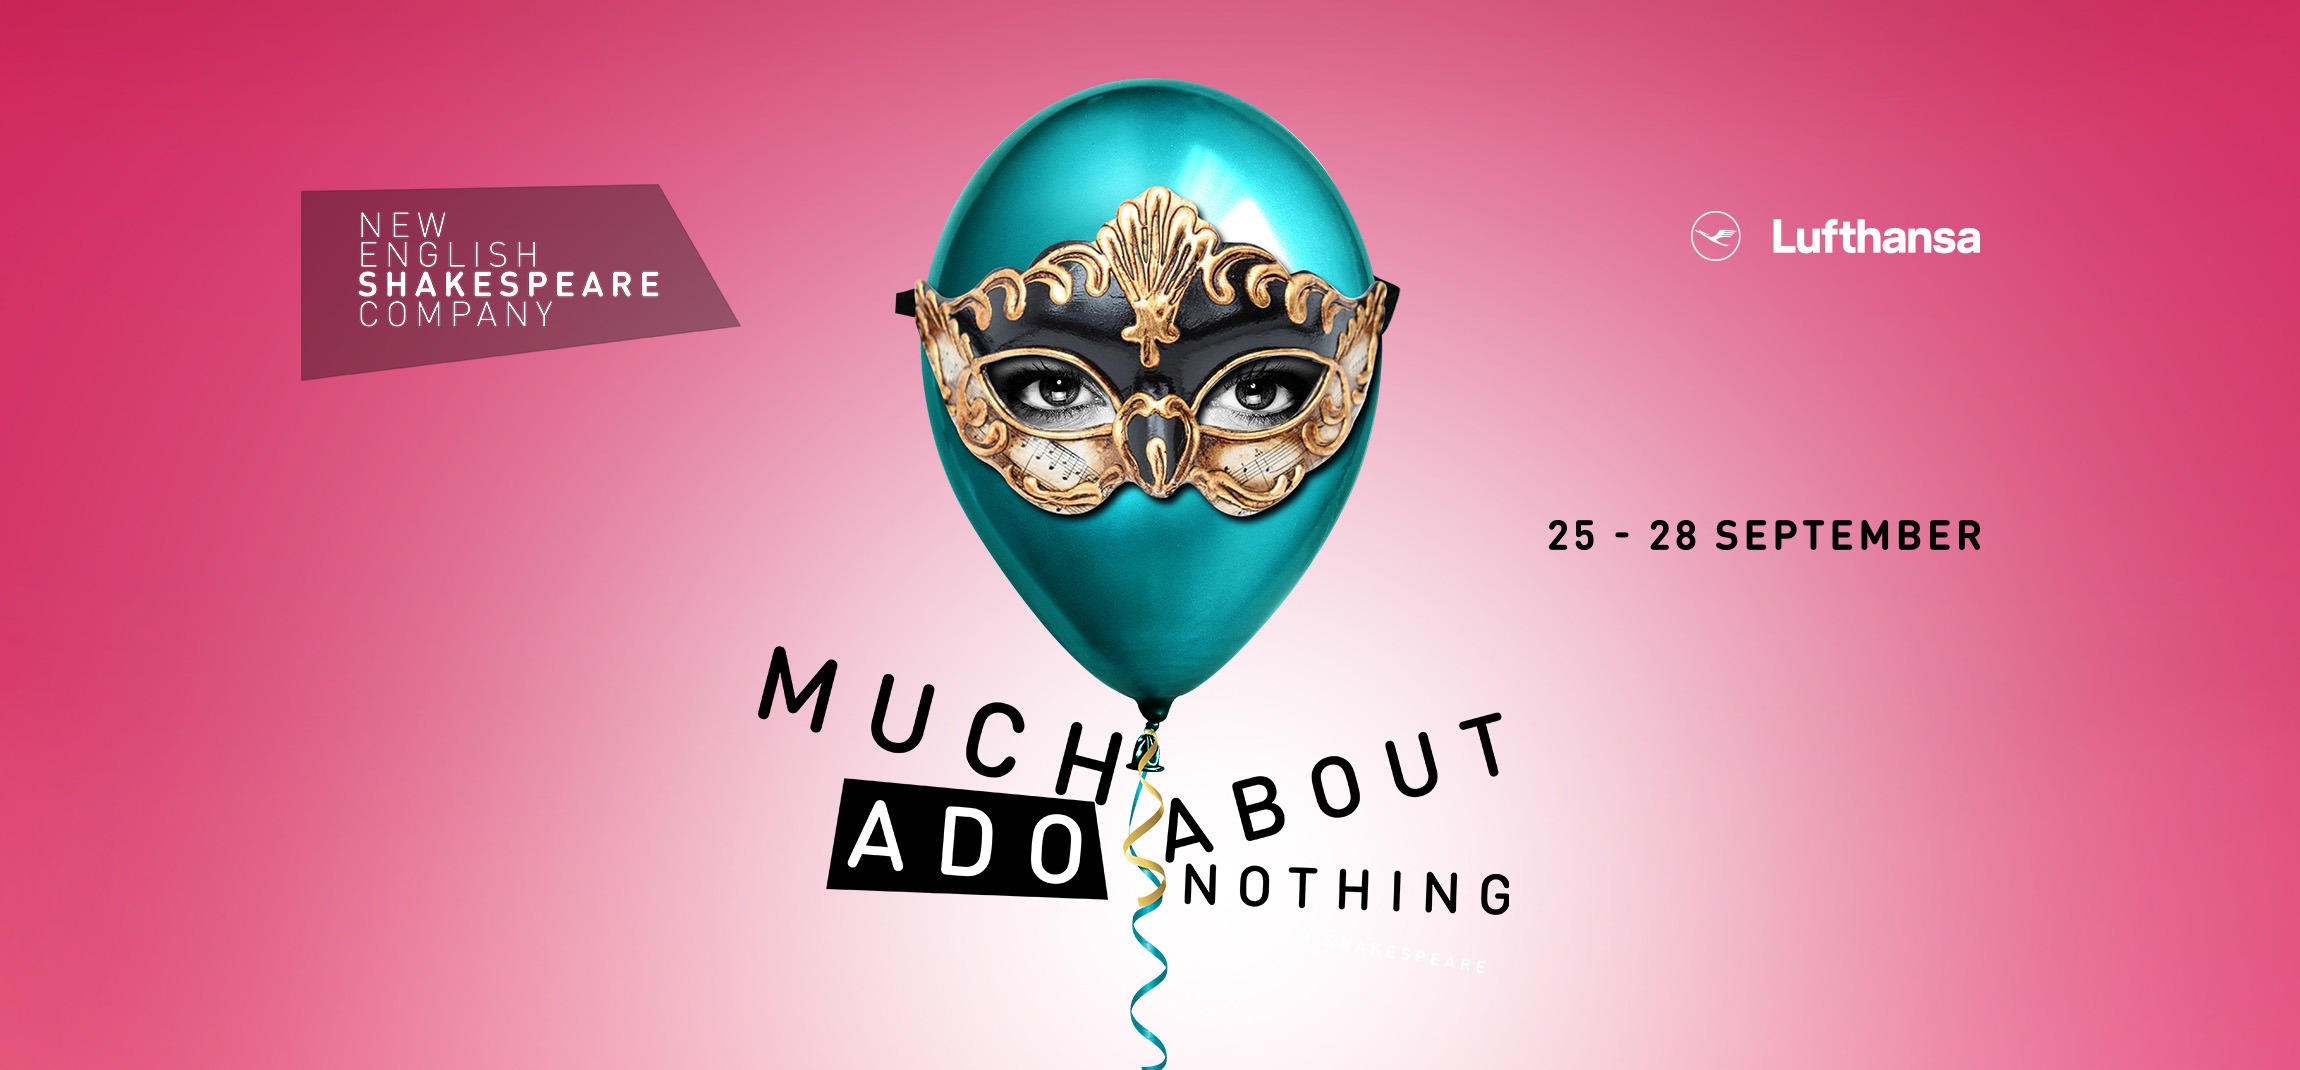 Much Ado About Nothing at the Dubai Opera - Coming Soon in UAE